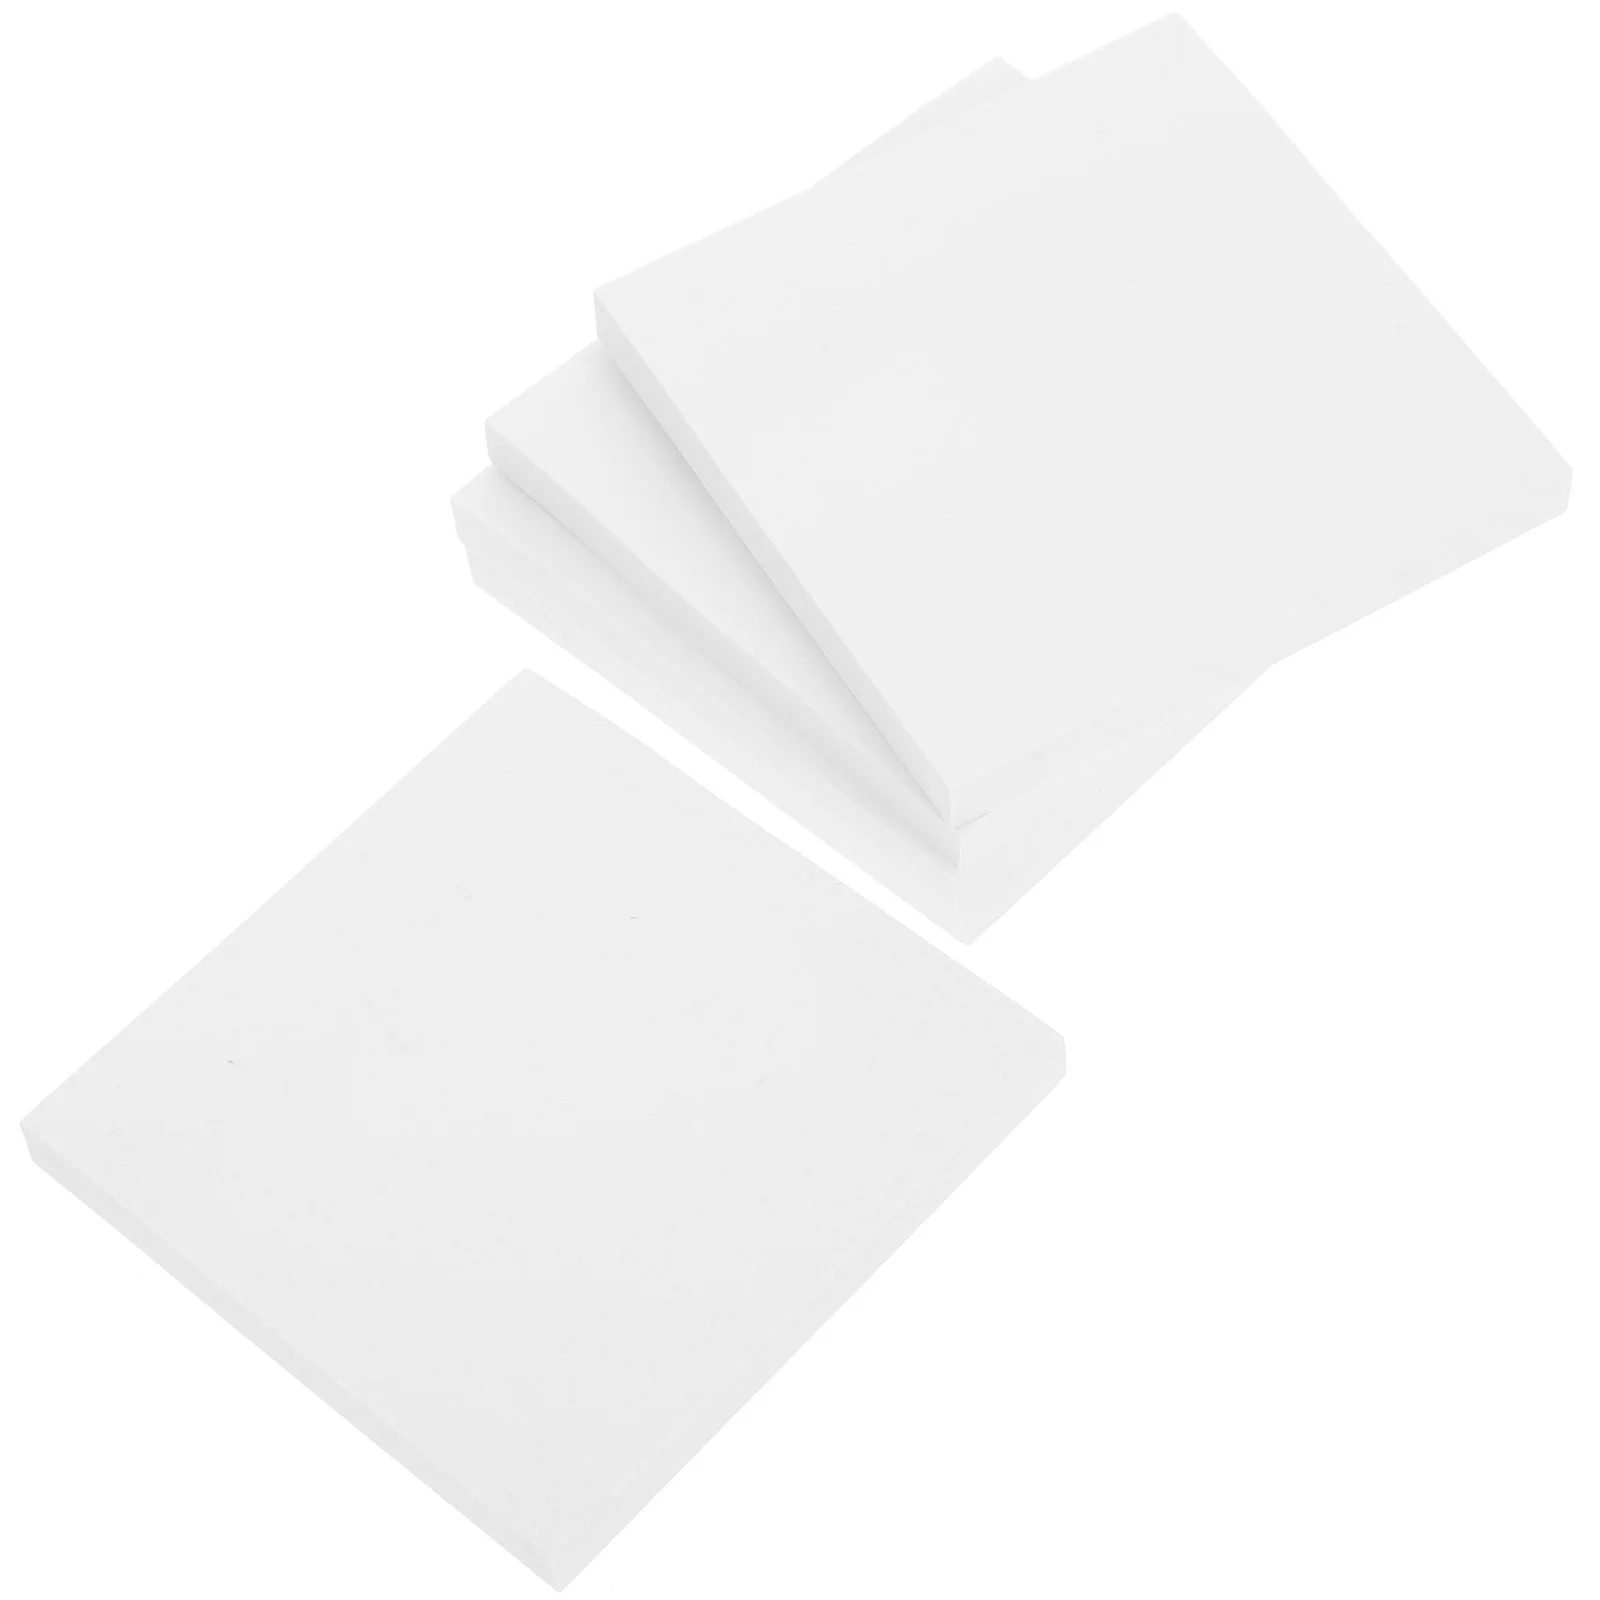 

5 Books Memo Pads Sticky Memo Papers Lovely Sticky Tabs Memo Notepads Self-adhesive Note Pads